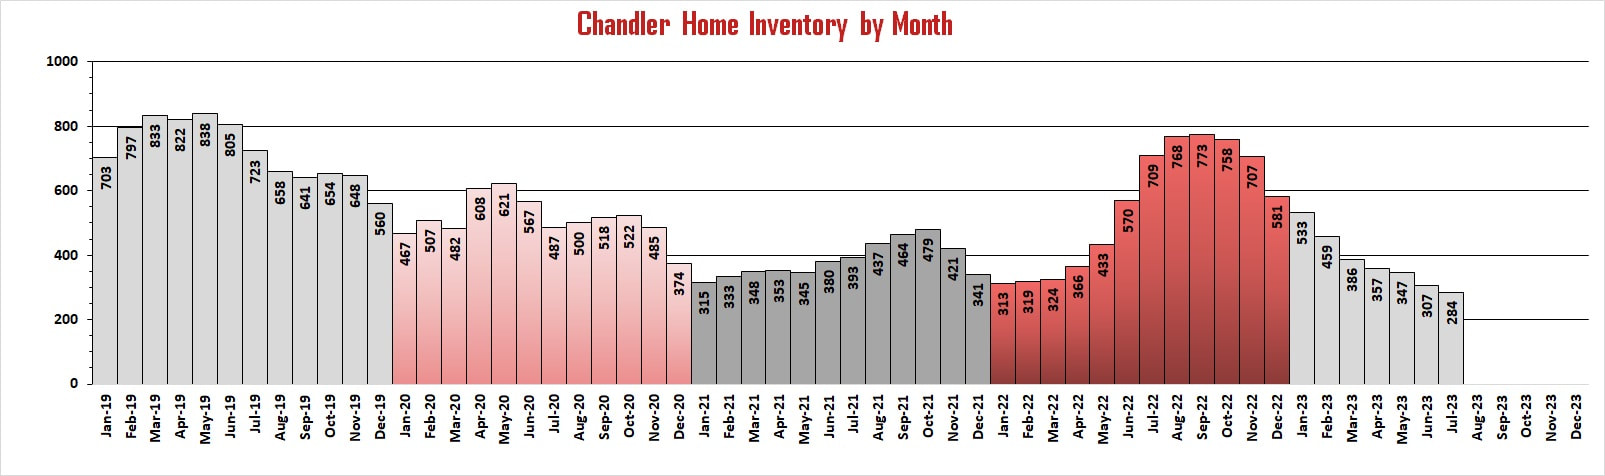 Chandler Housing Market Reports - Inventory of Homes for Sale in Chandler | Troy Erickson Realtor